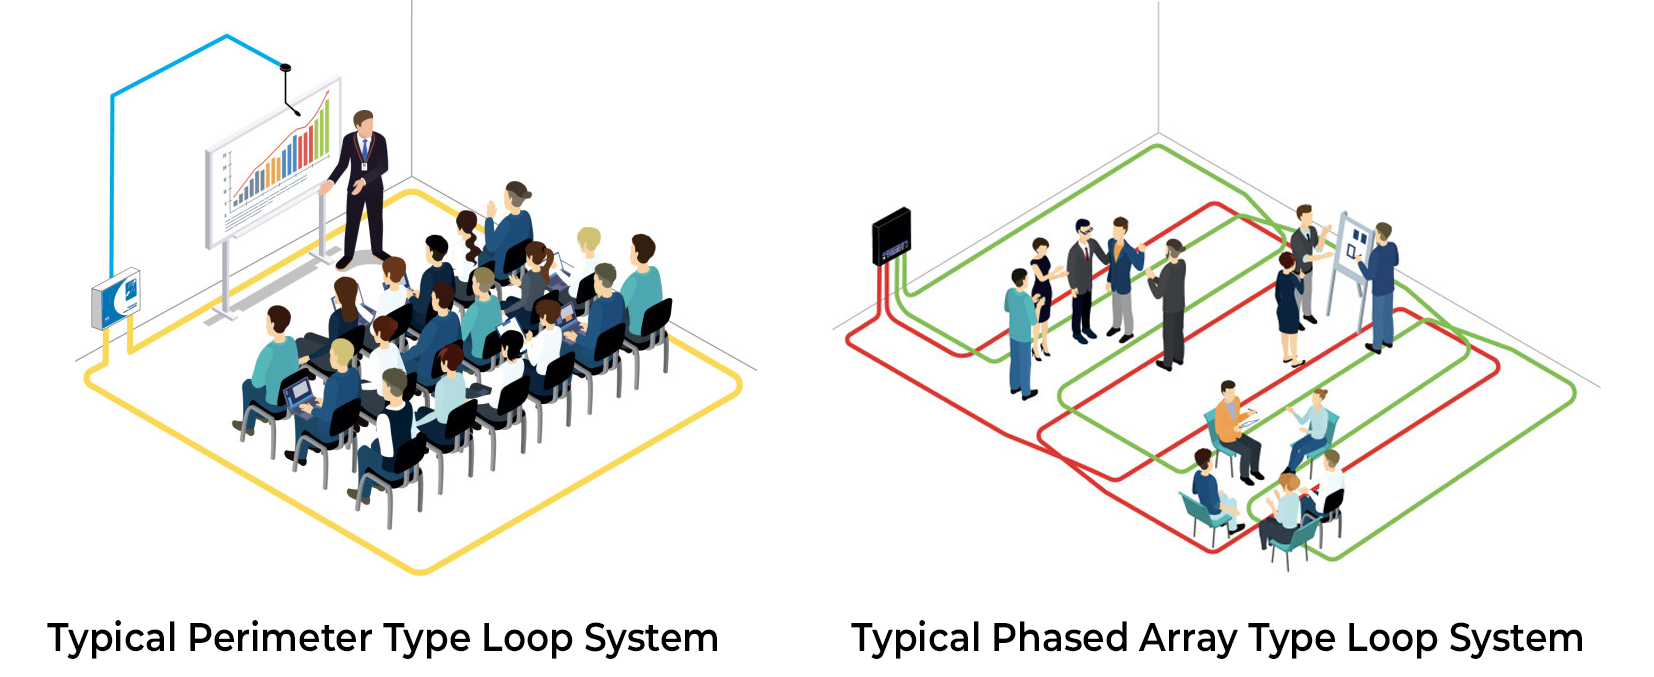 A comparison of Perimeter Versus Phased Array Loop System Layouts